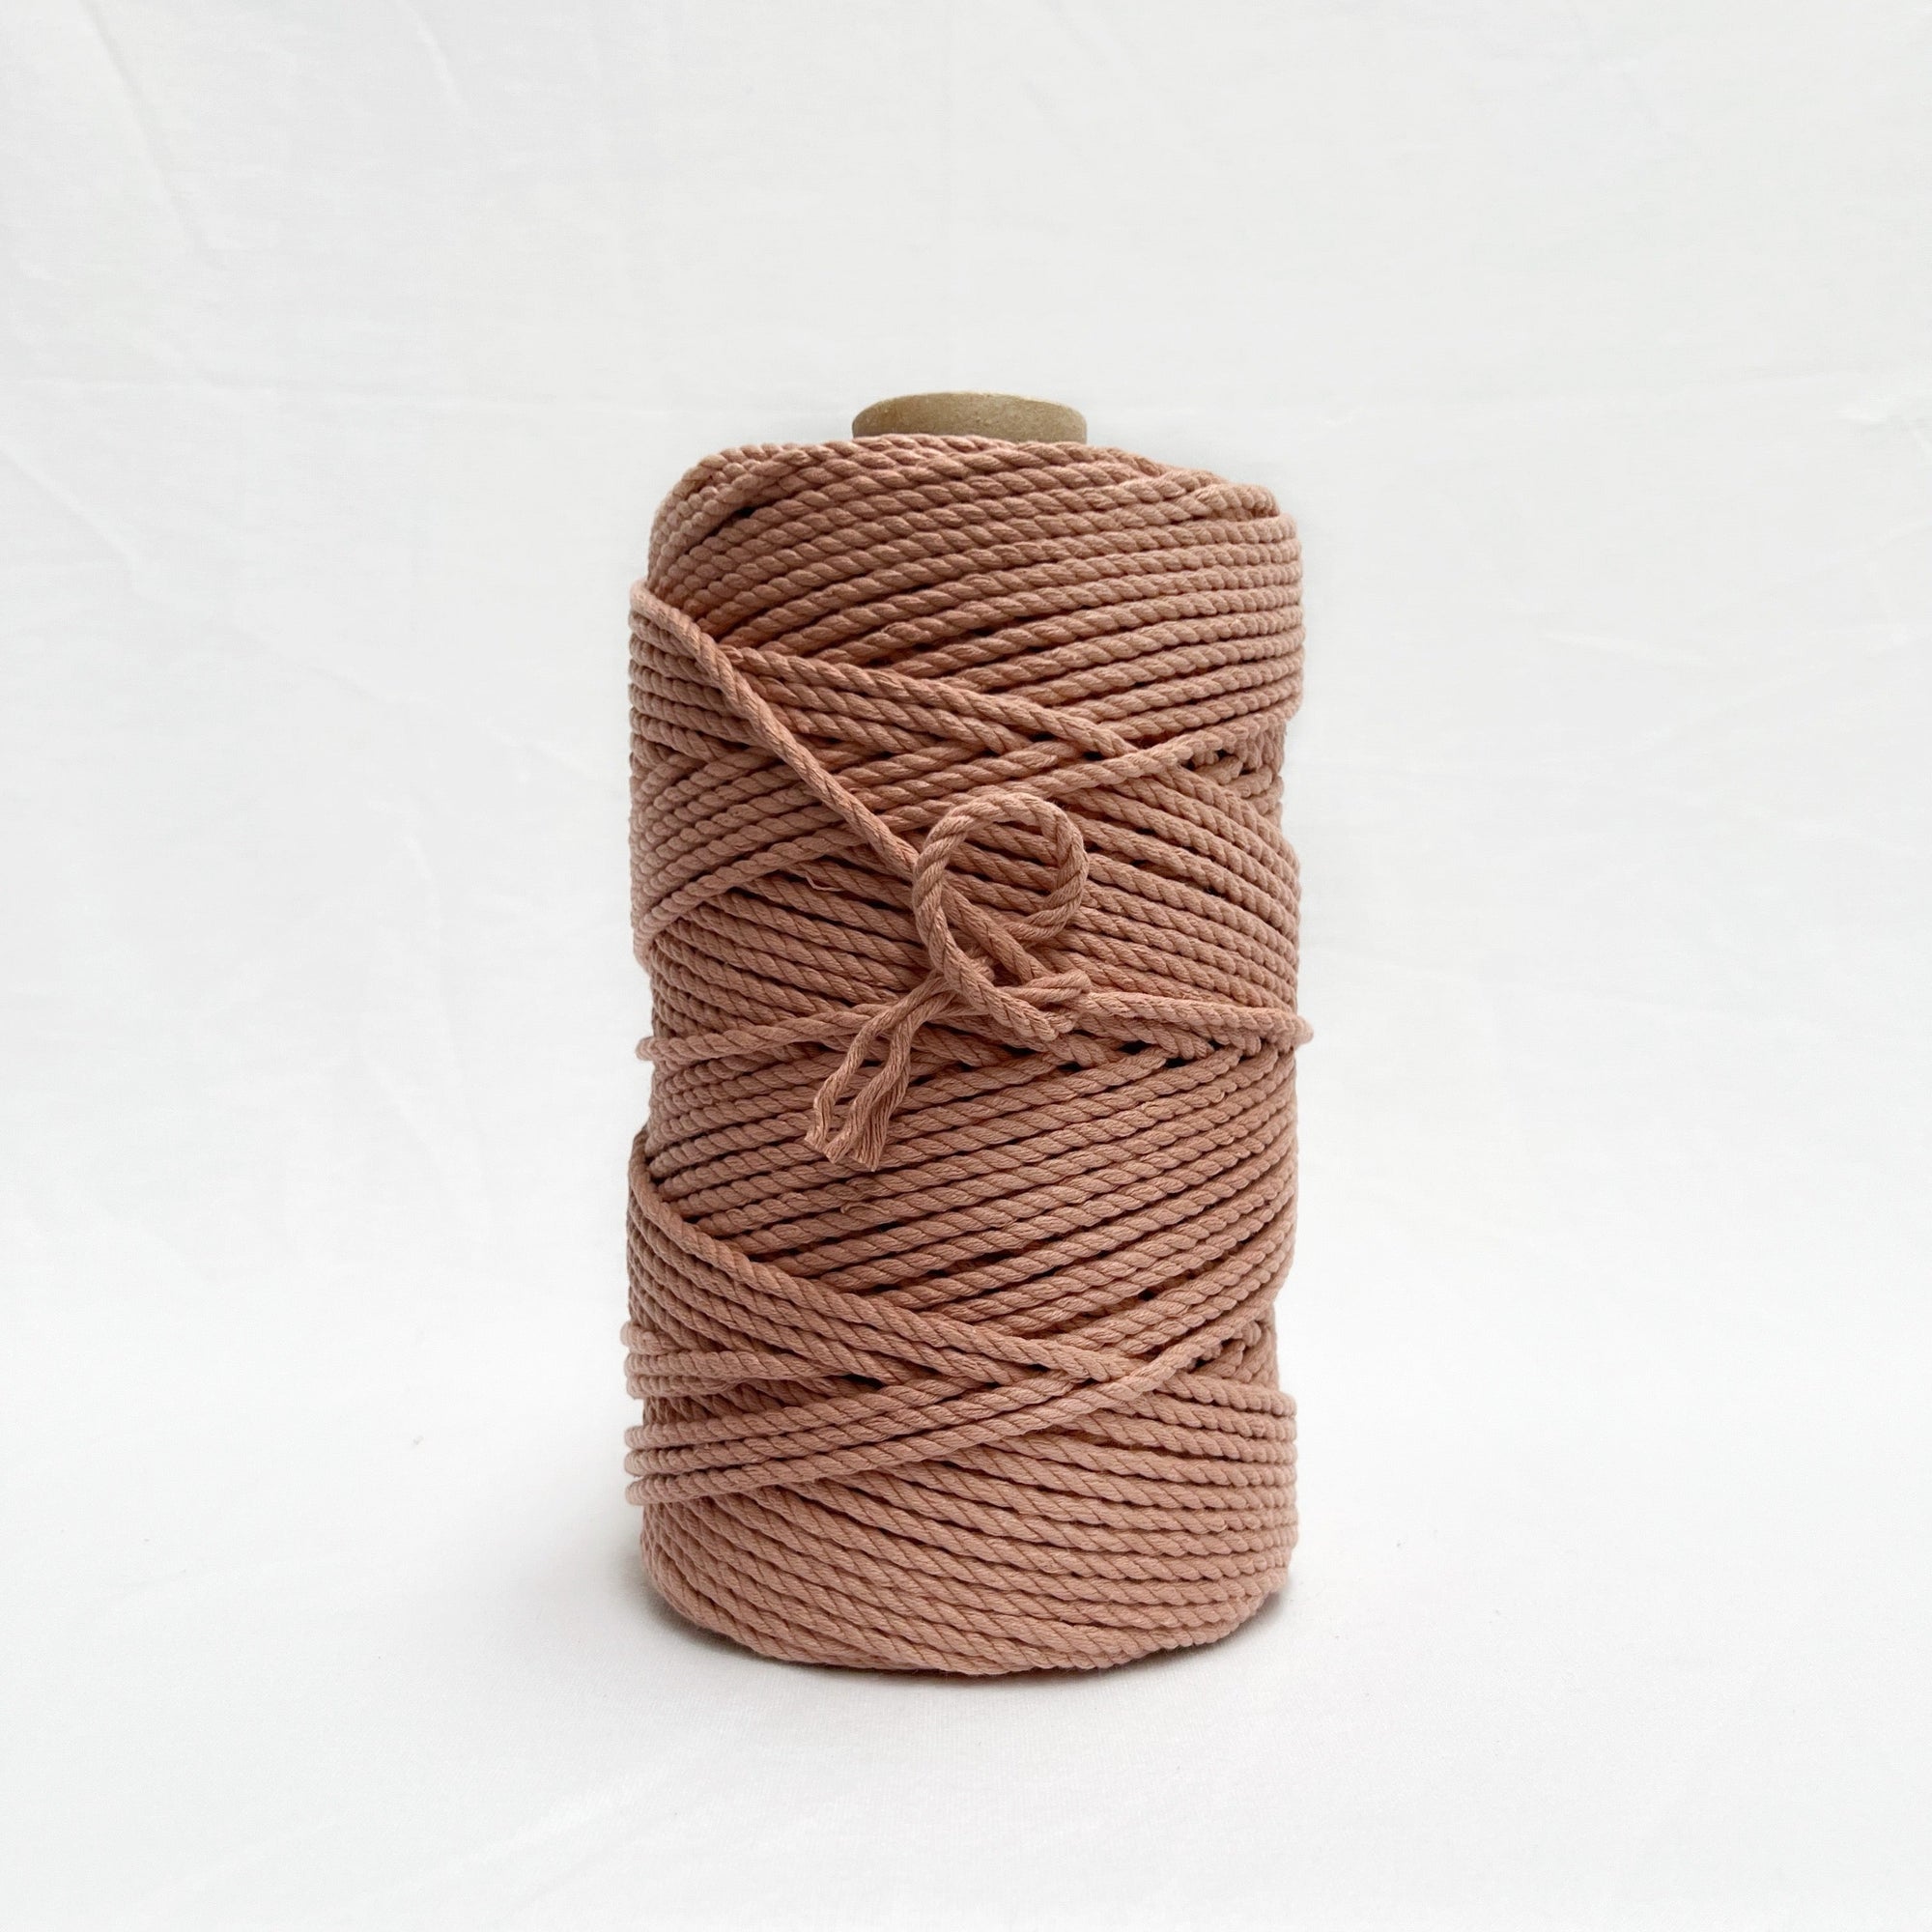 mary maker studio 1kg 4mm recycled cotton macrame rope in vintage peach colour suitable for macrame workshops beginners and advanced artists